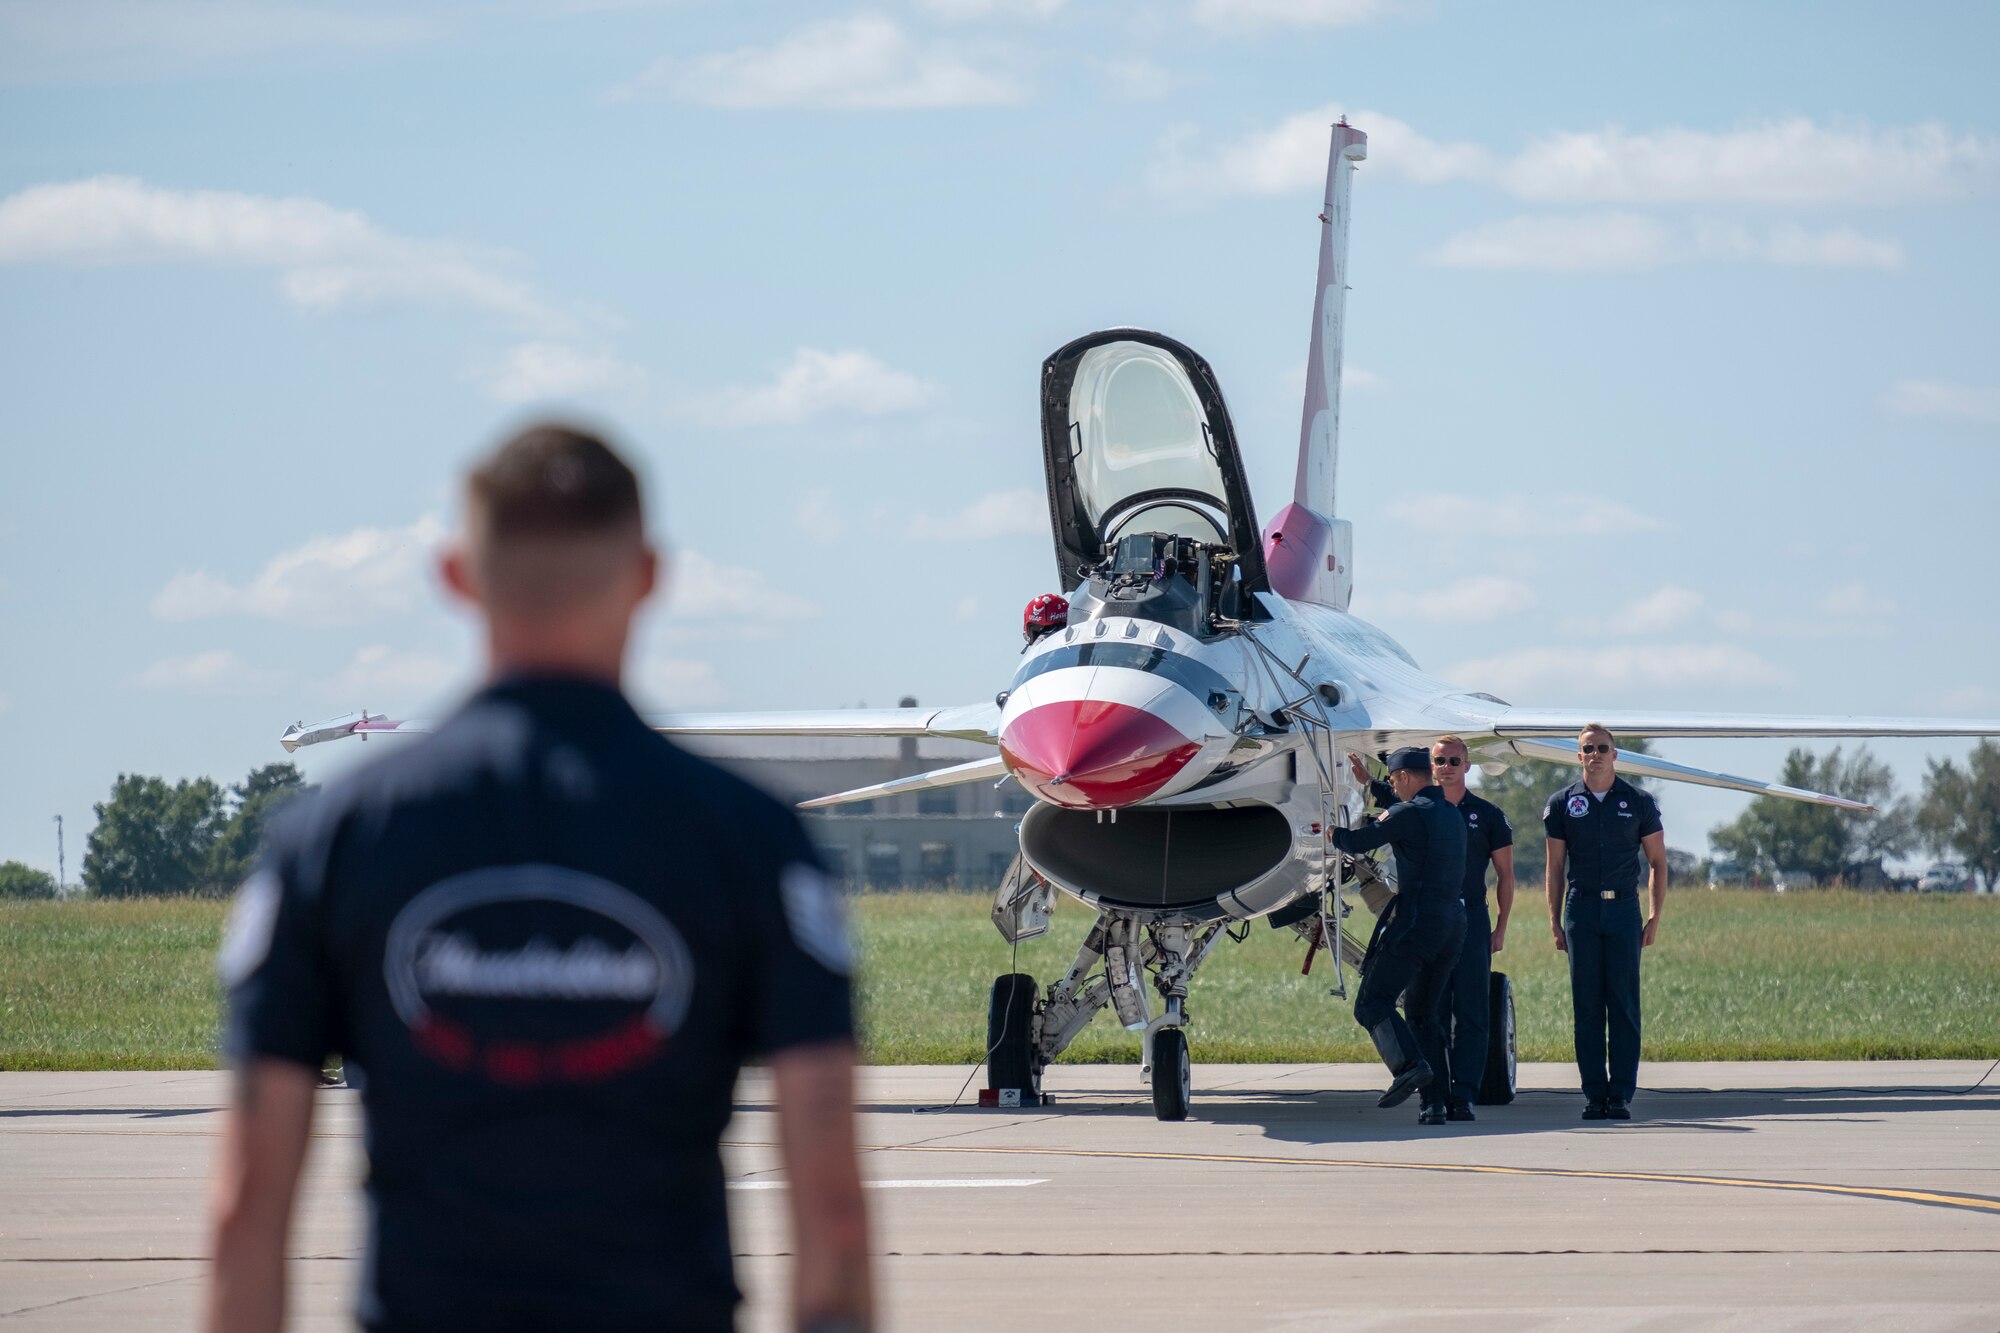 Members of the U.S. Thunderbirds prepare for a performance for Team McConnell at the Frontiers in Flight Open House and Airshow Sept. 9, 2018, McConnell Air Force Base, Kan. In 1953 the Air Force activated the 3600th Demonstration Unit, which adopted the name “Thunderbirds,” establishing a 55-year heritage of displaying the capabilities of the most powerful Air Force in the world. (U.S. Air Force Photo by Staff Sgt. Preston Webb)